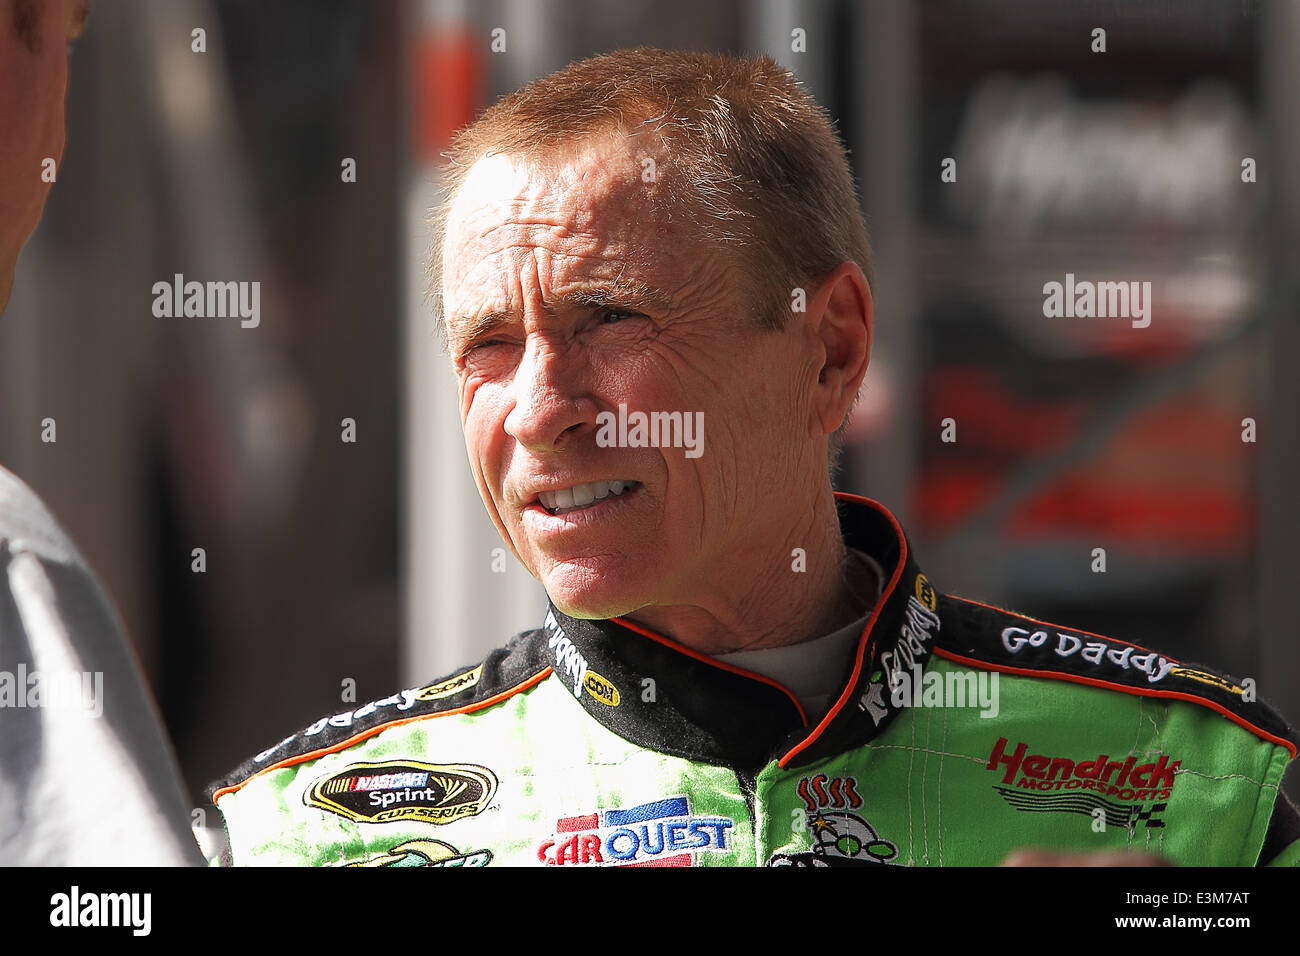 AVONDALE, AZ - OCT 5: Mark Martin during a NASCAR Sprint Cup track testing session on Oct. 5, 2011 at PIR Stock Photo